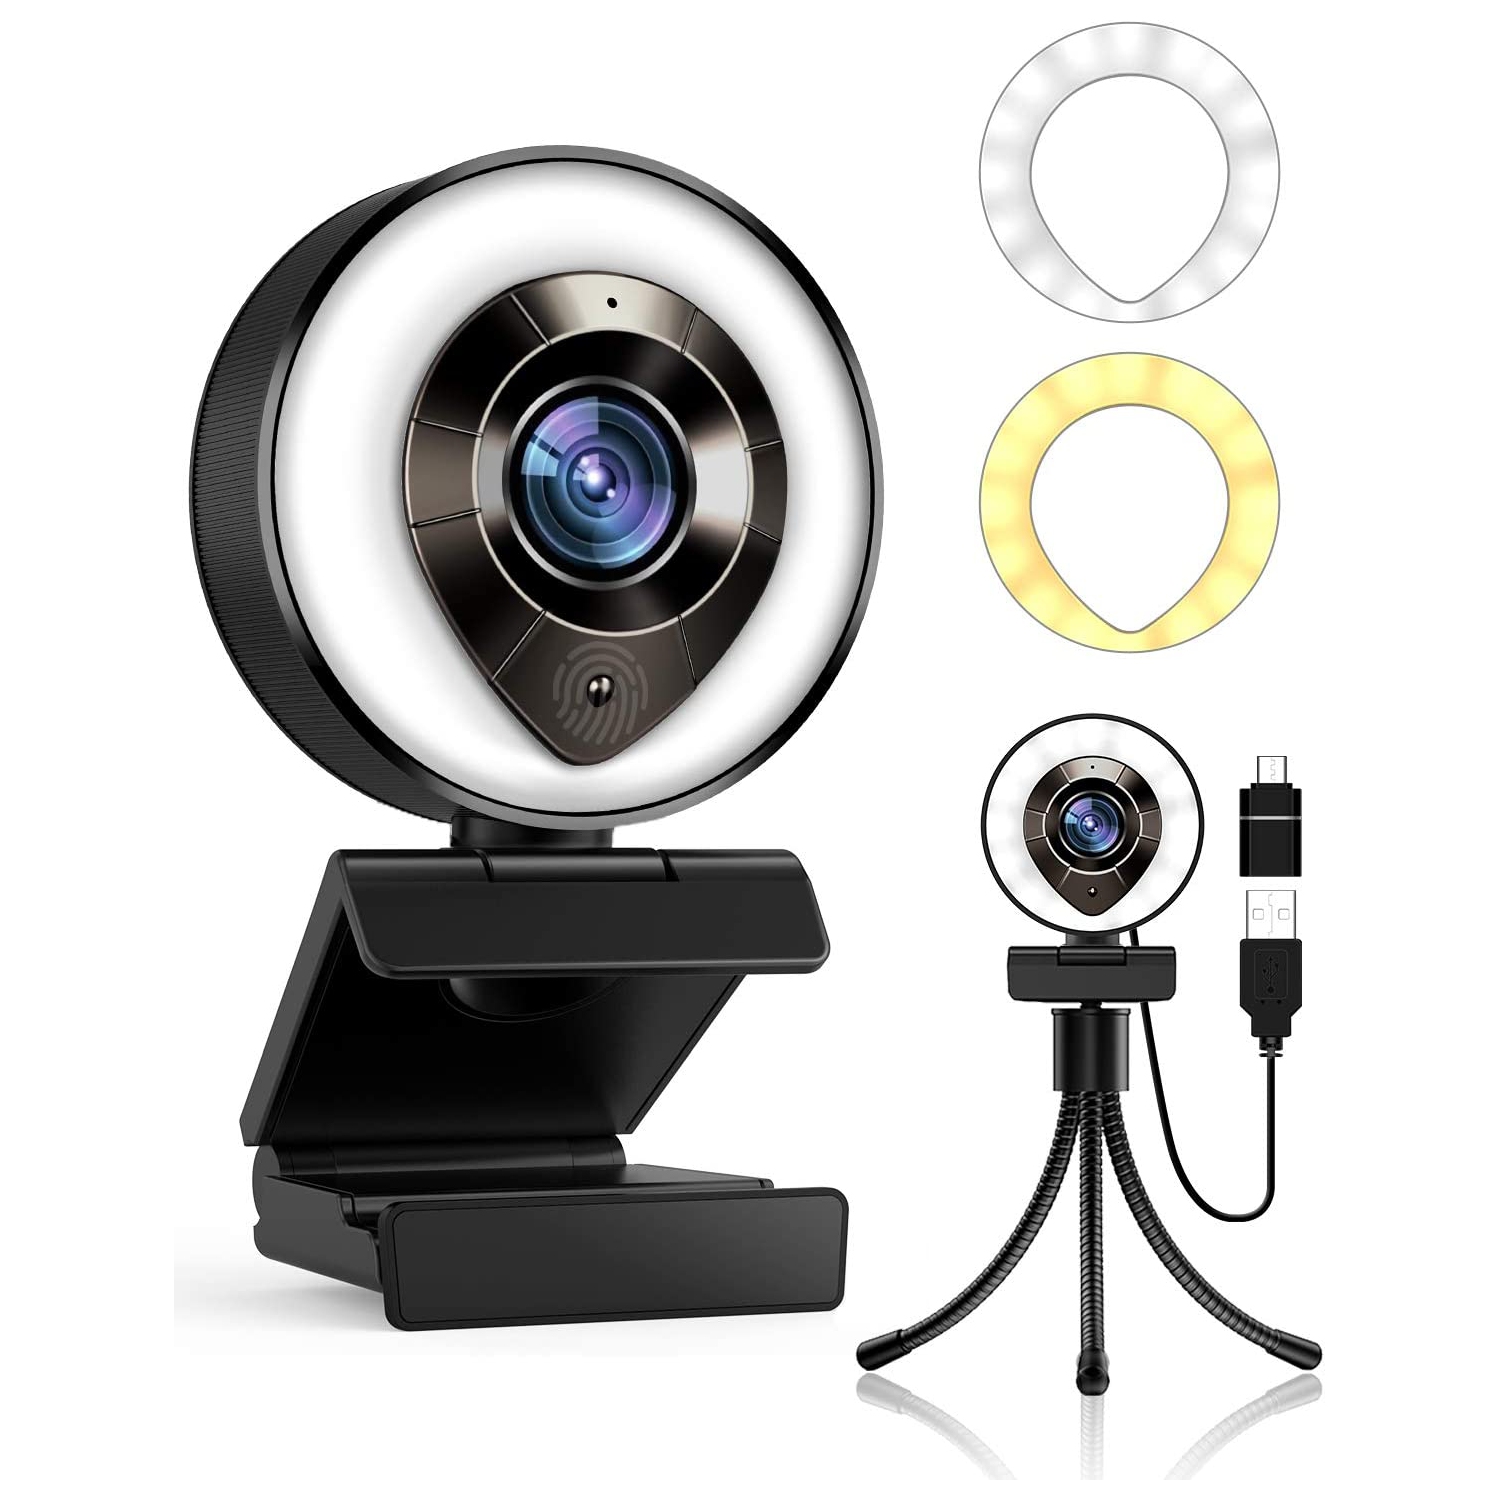 2022 HD 1080P Webcam with Microphone,Ring Light,Plug and Play,Adjustable Brightness,Advanced Auto-Focus,Privacy Protection,USB Streaming Webcam for PC Desktop Laptop MAC,Z